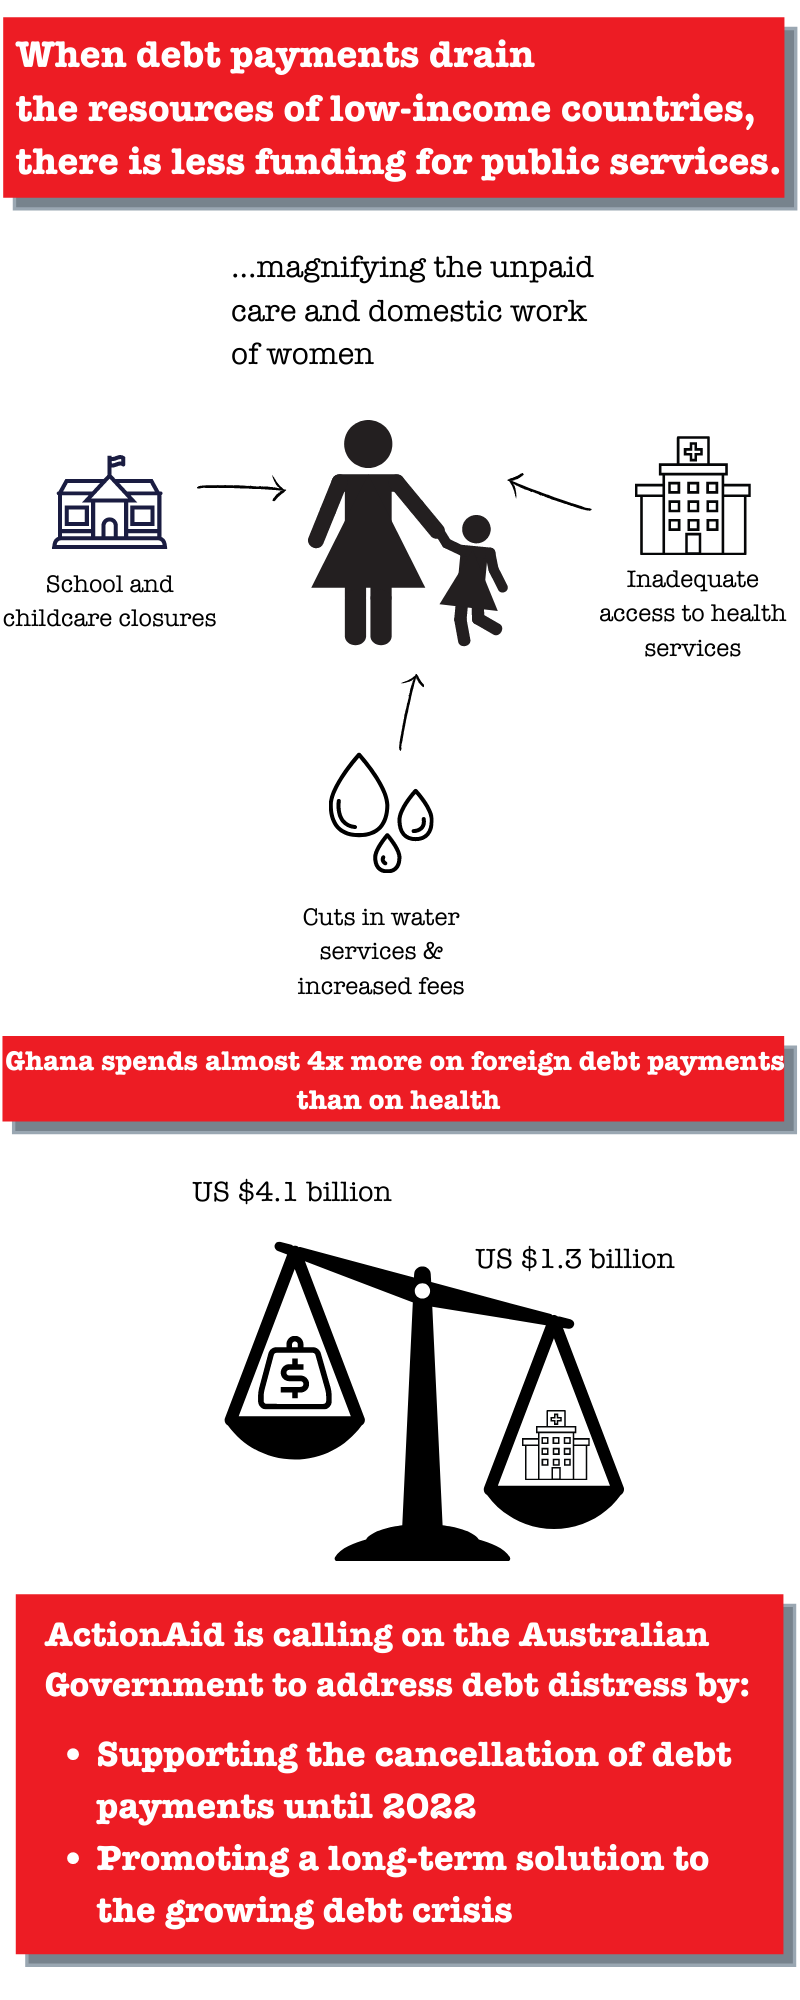 #CancelTheDebt infographic: how does debt impact women's rights? 